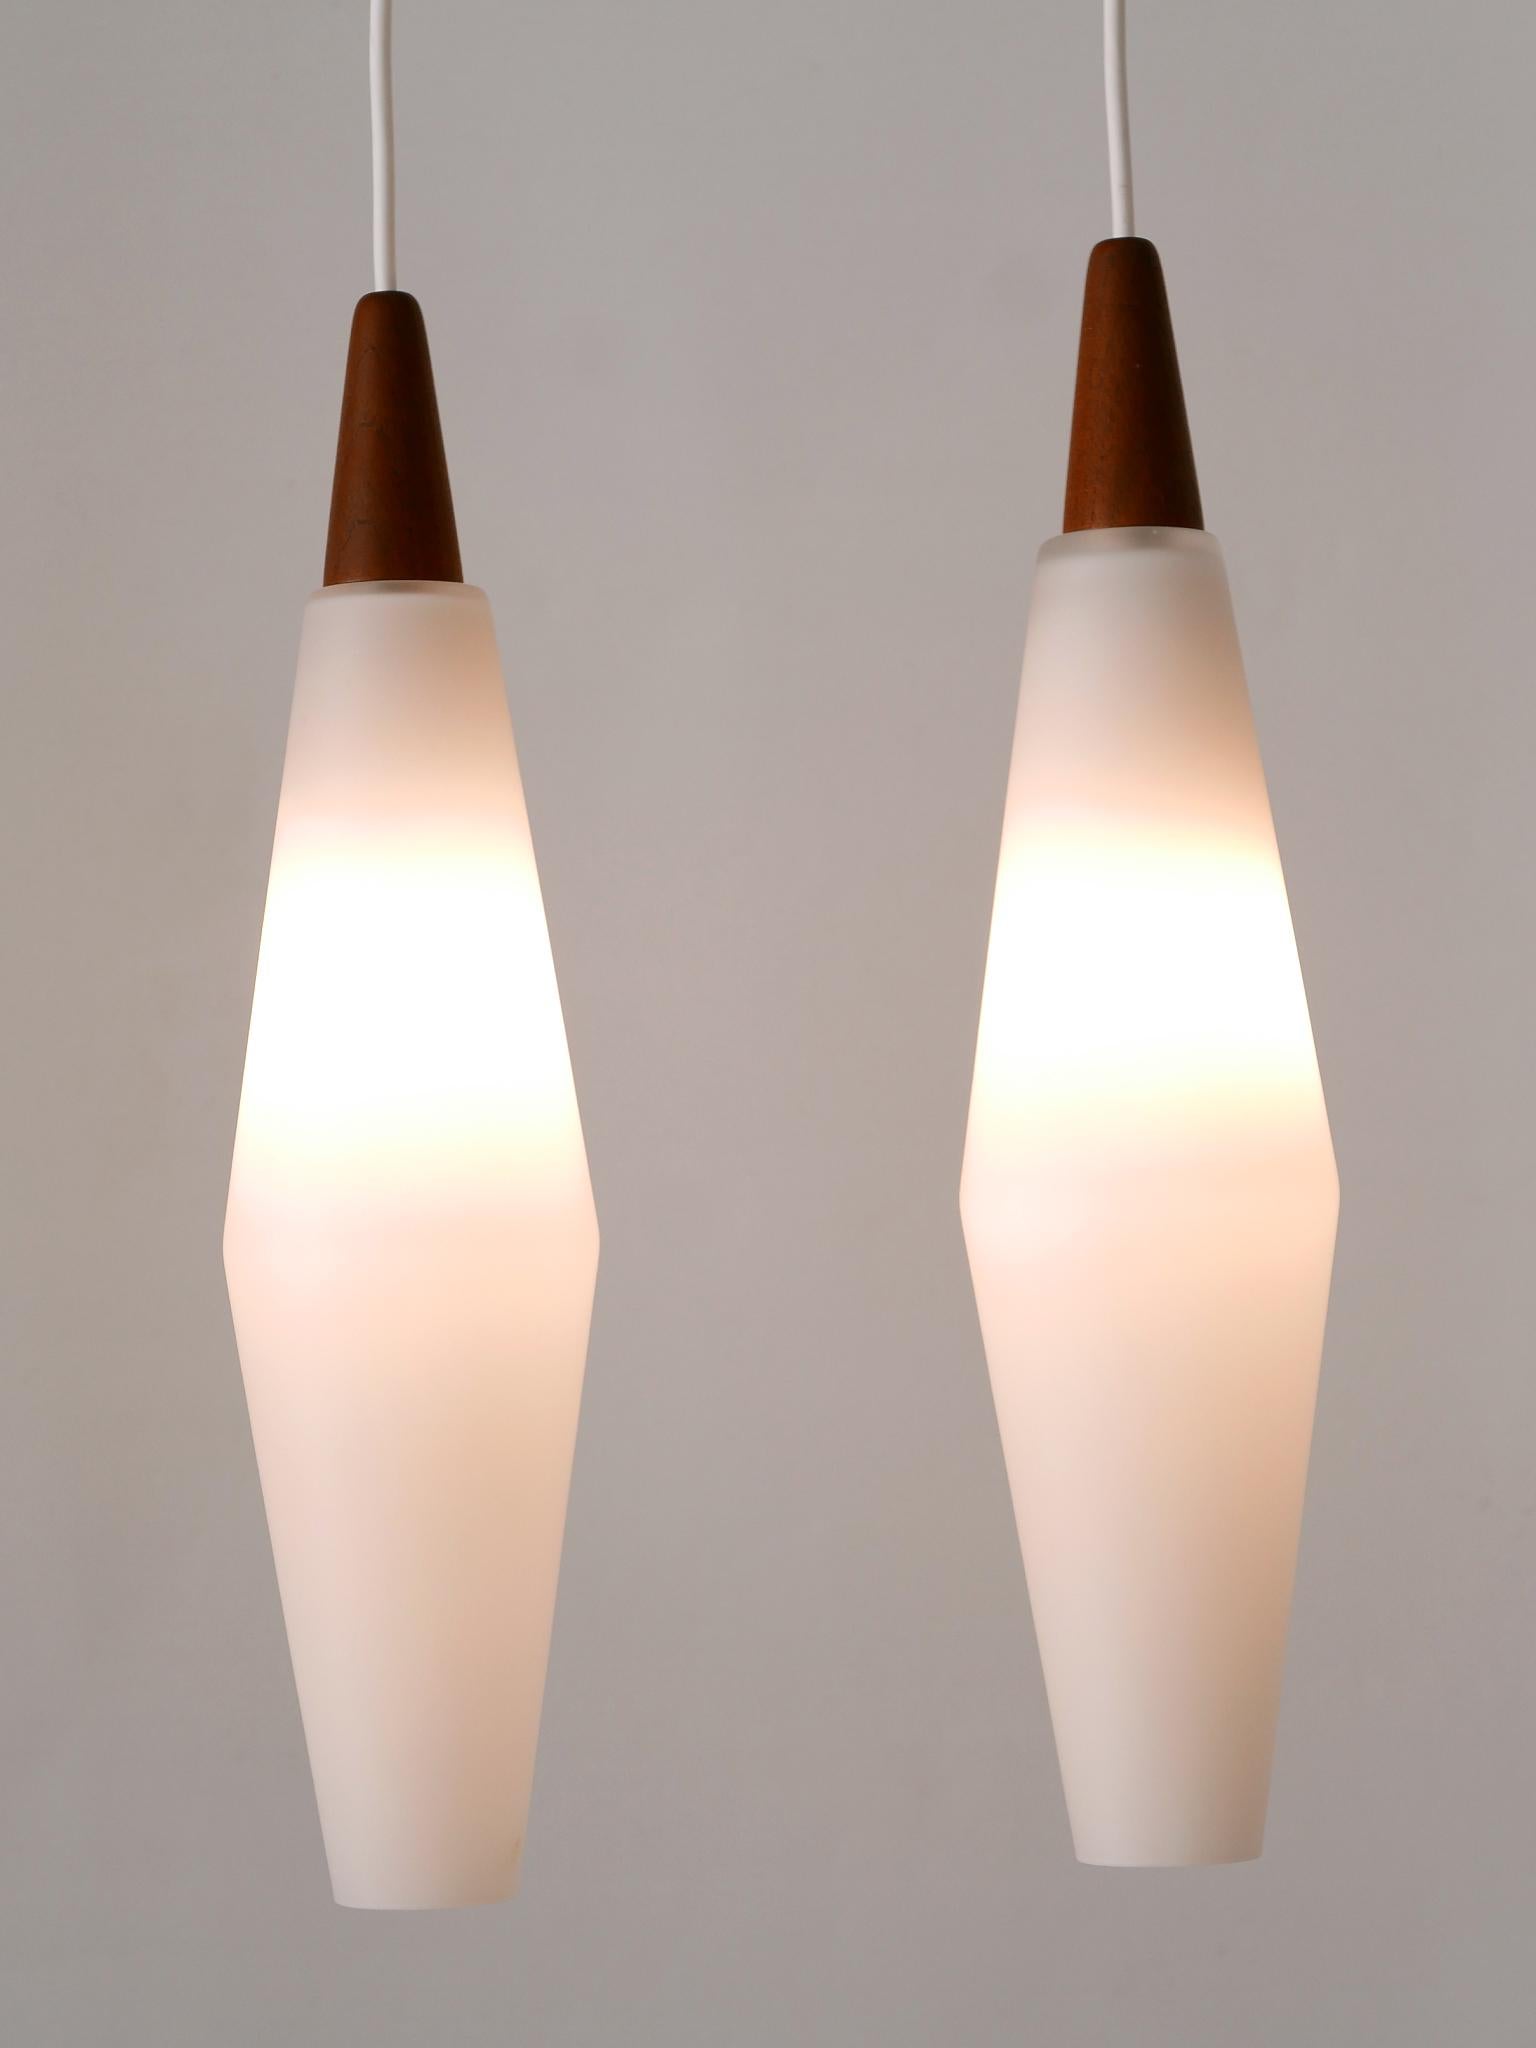 Set of two lovely and elegant Mid-Century Modern opaline glass & teak pendant lamps in organic shape. Designed and manufactured in Scandinavia, 1960s.

Executed in opaline glass & teak wood, each pendant lamp is executed with 1 x E14 / E12 Edison